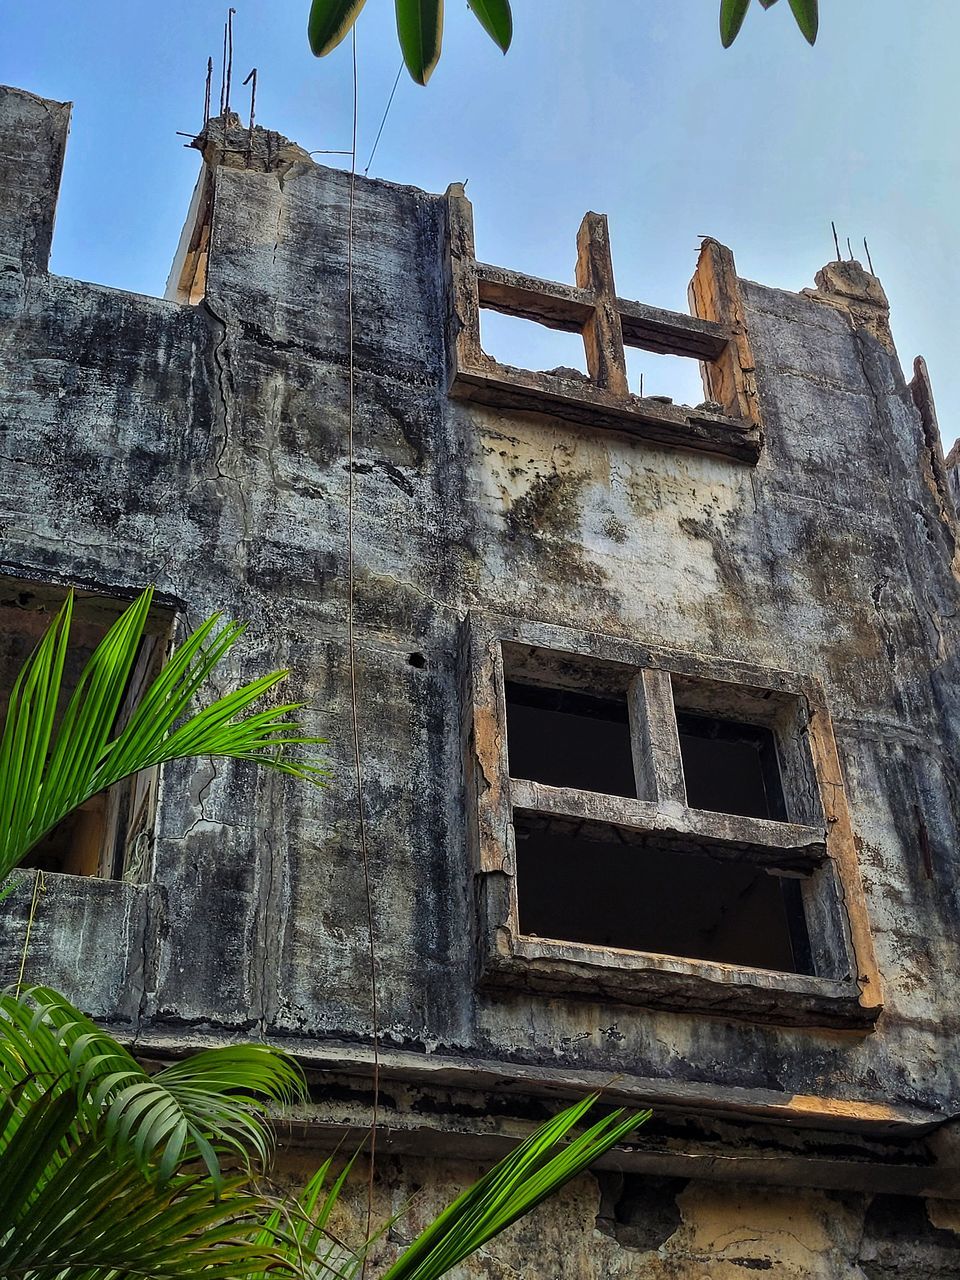 architecture, built structure, ruins, building exterior, history, nature, sky, building, no people, the past, house, plant, old, low angle view, abandoned, wall, outdoors, window, day, tree, ancient history, damaged, travel destinations, village, rundown, tropical climate